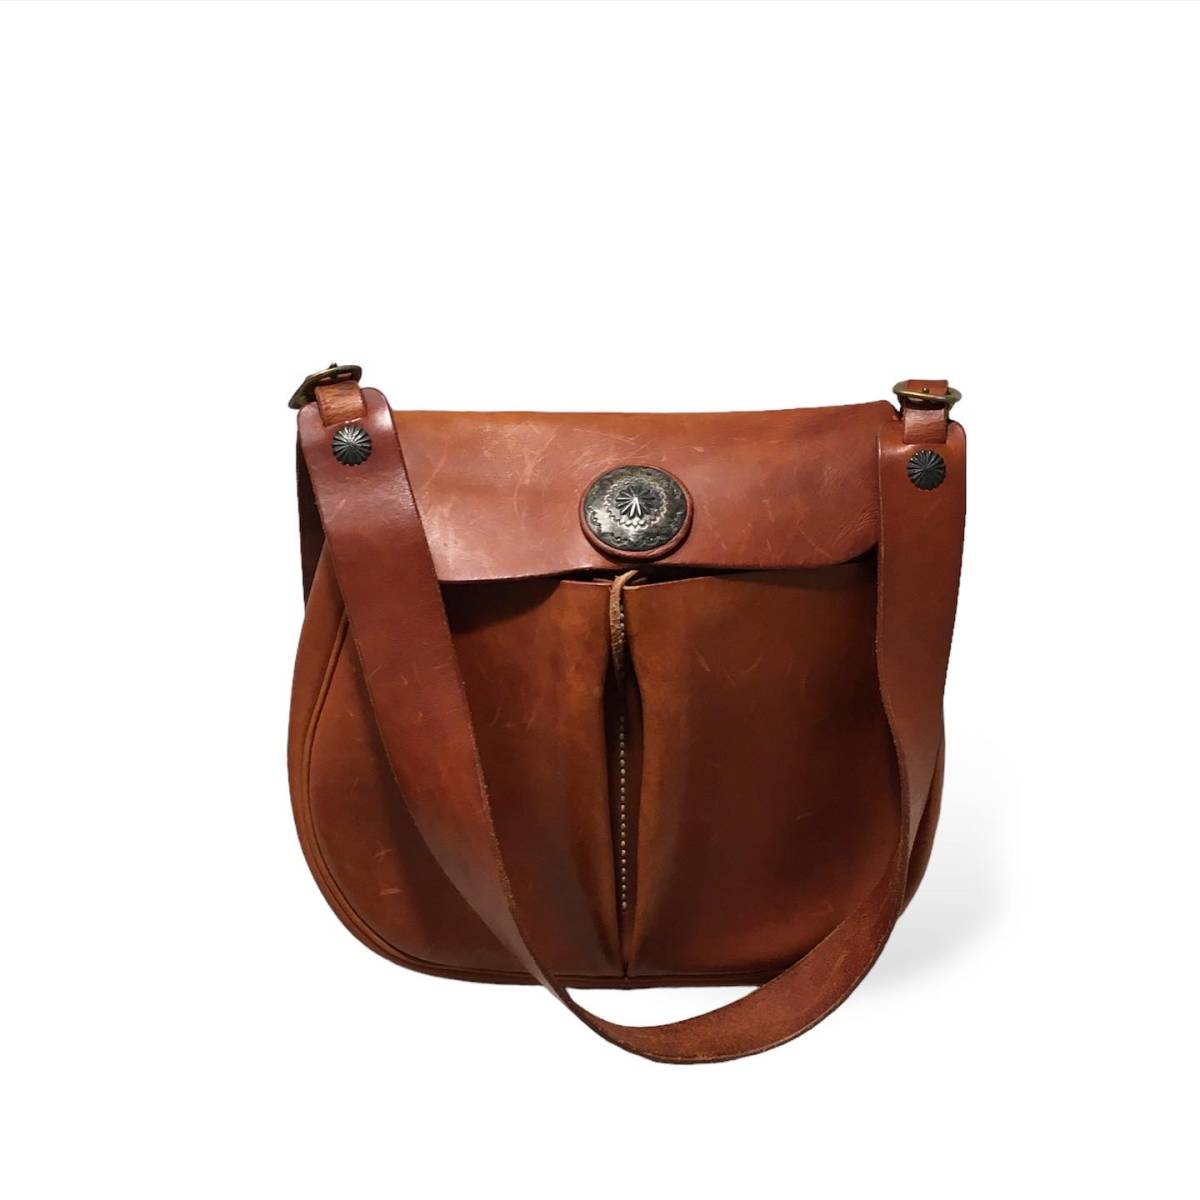 LUCKY JOHN concho button leather Shoulder Bag コンチョボタンレザーショルダーバッグ ラッキージョン 店舗受取可